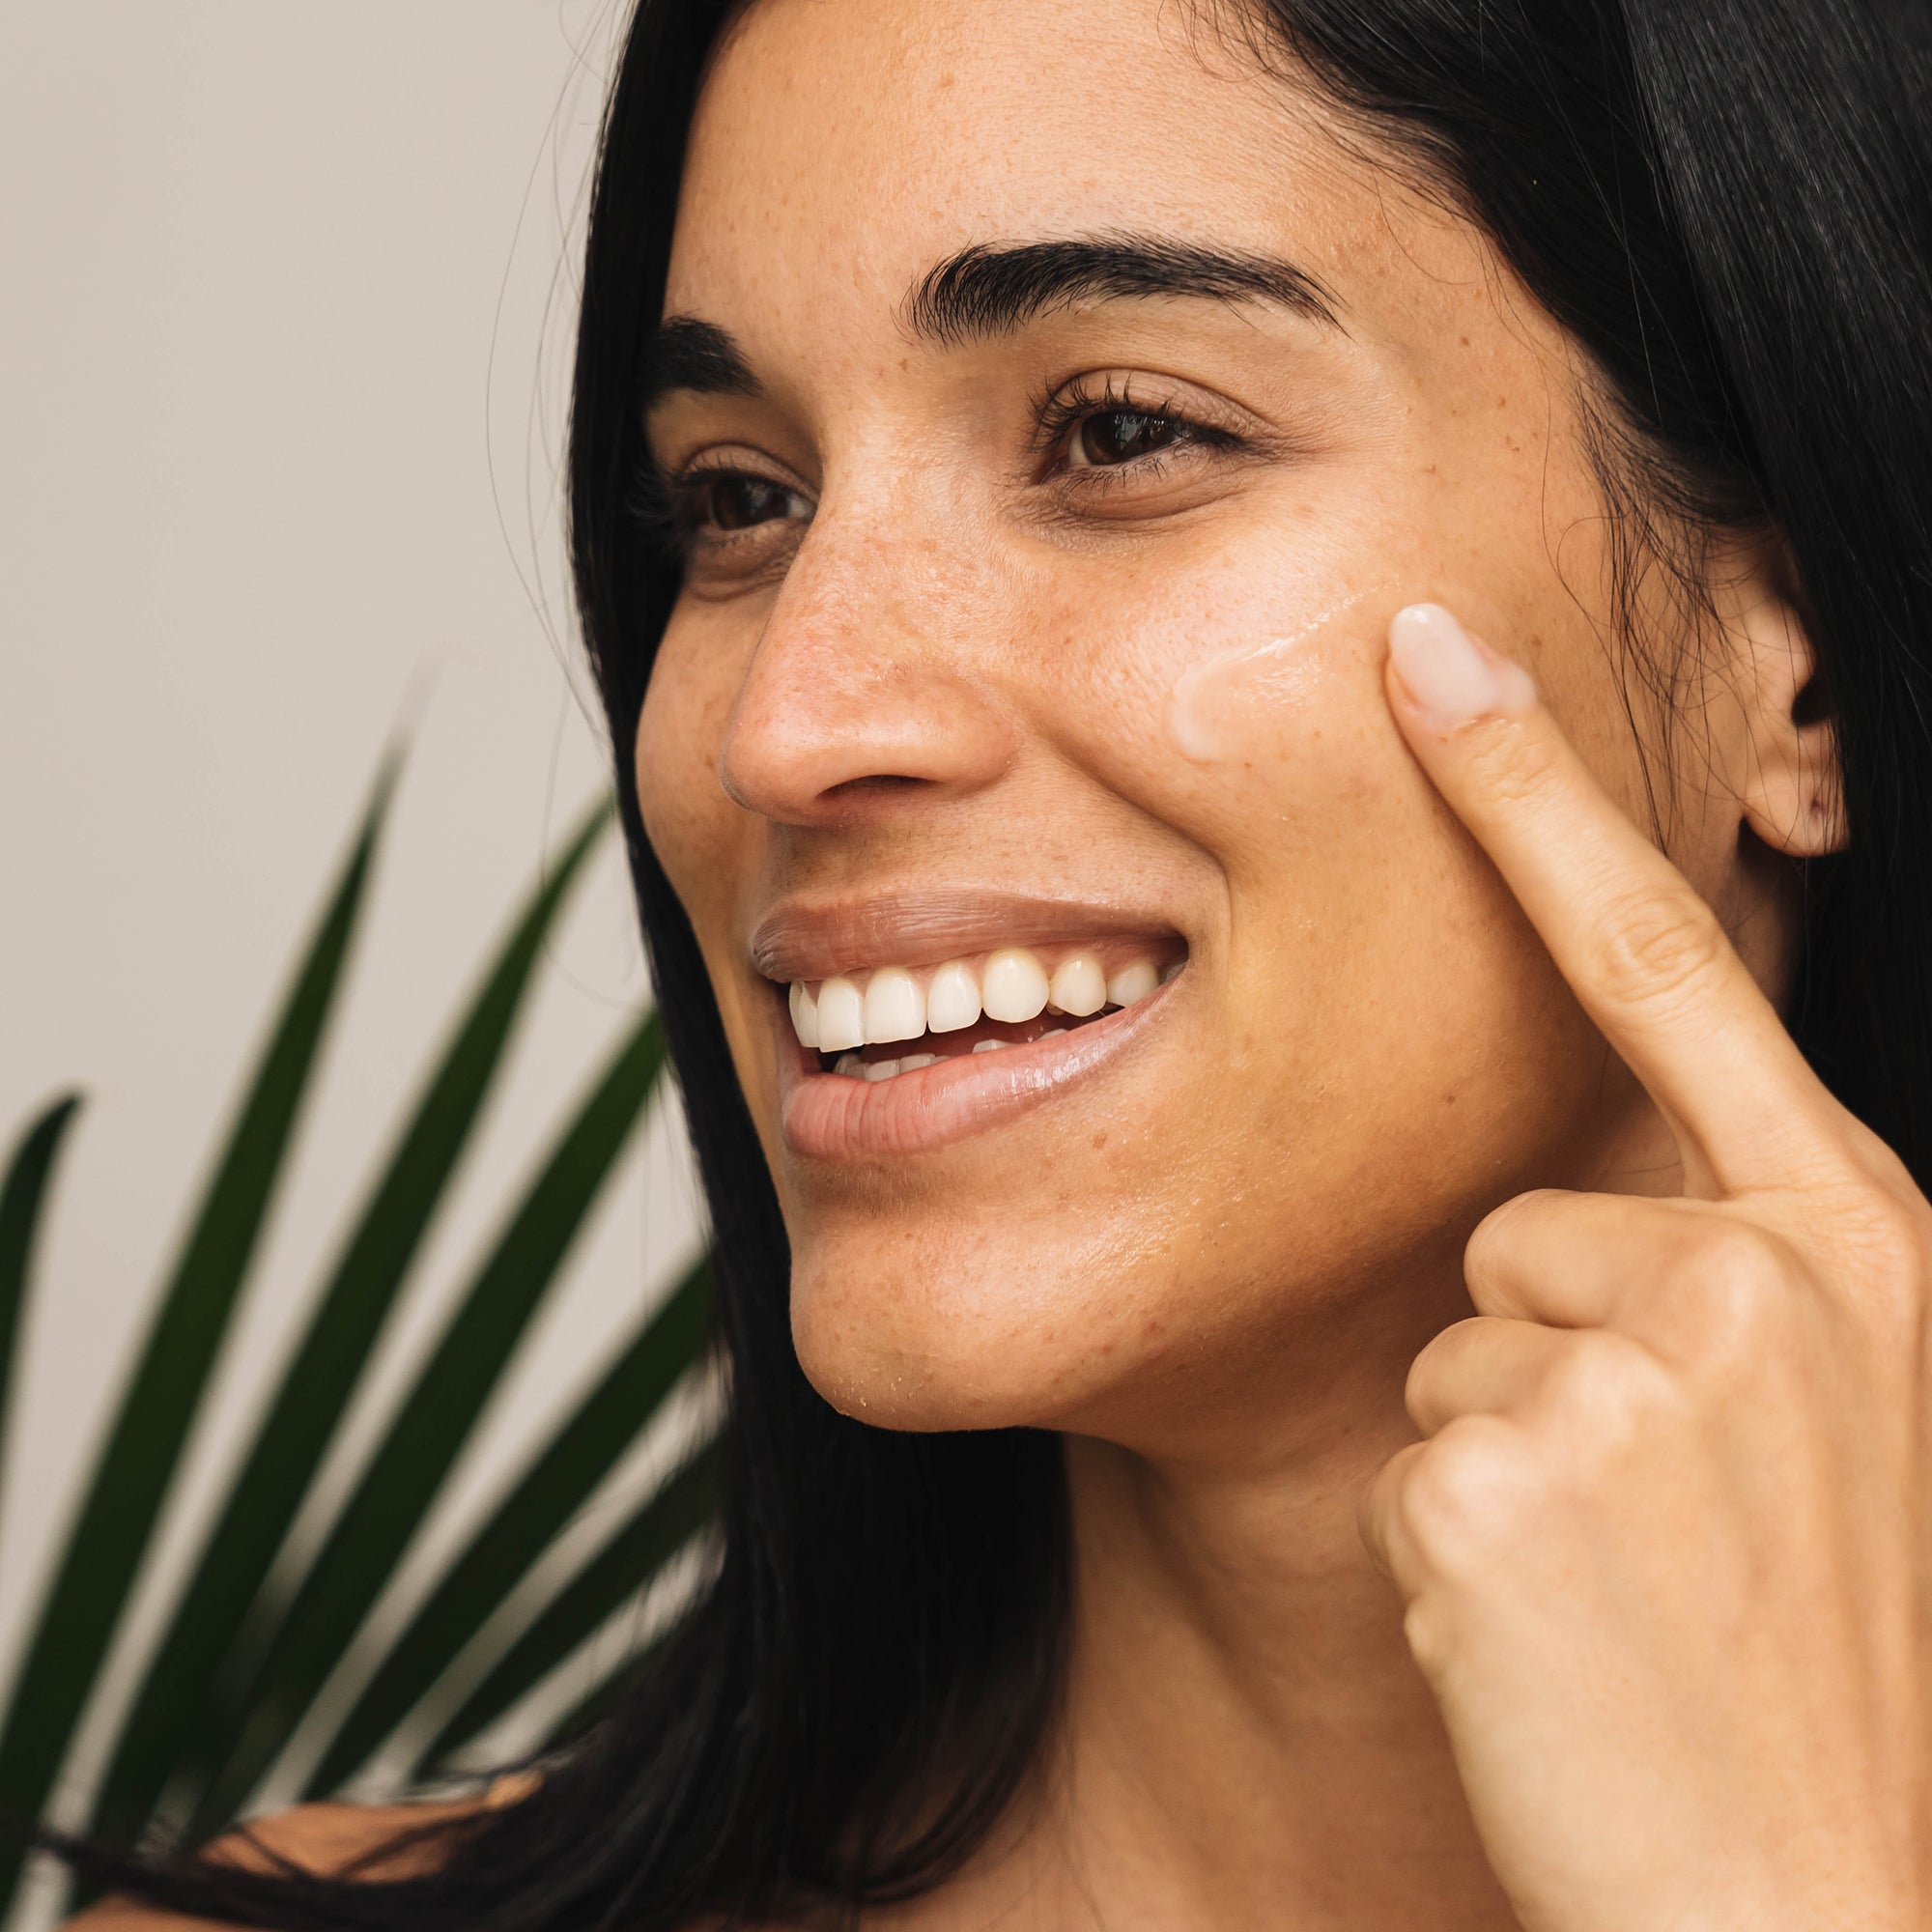 Body Skincare 101: How To Get Smooth, Supple Skin From The Chin